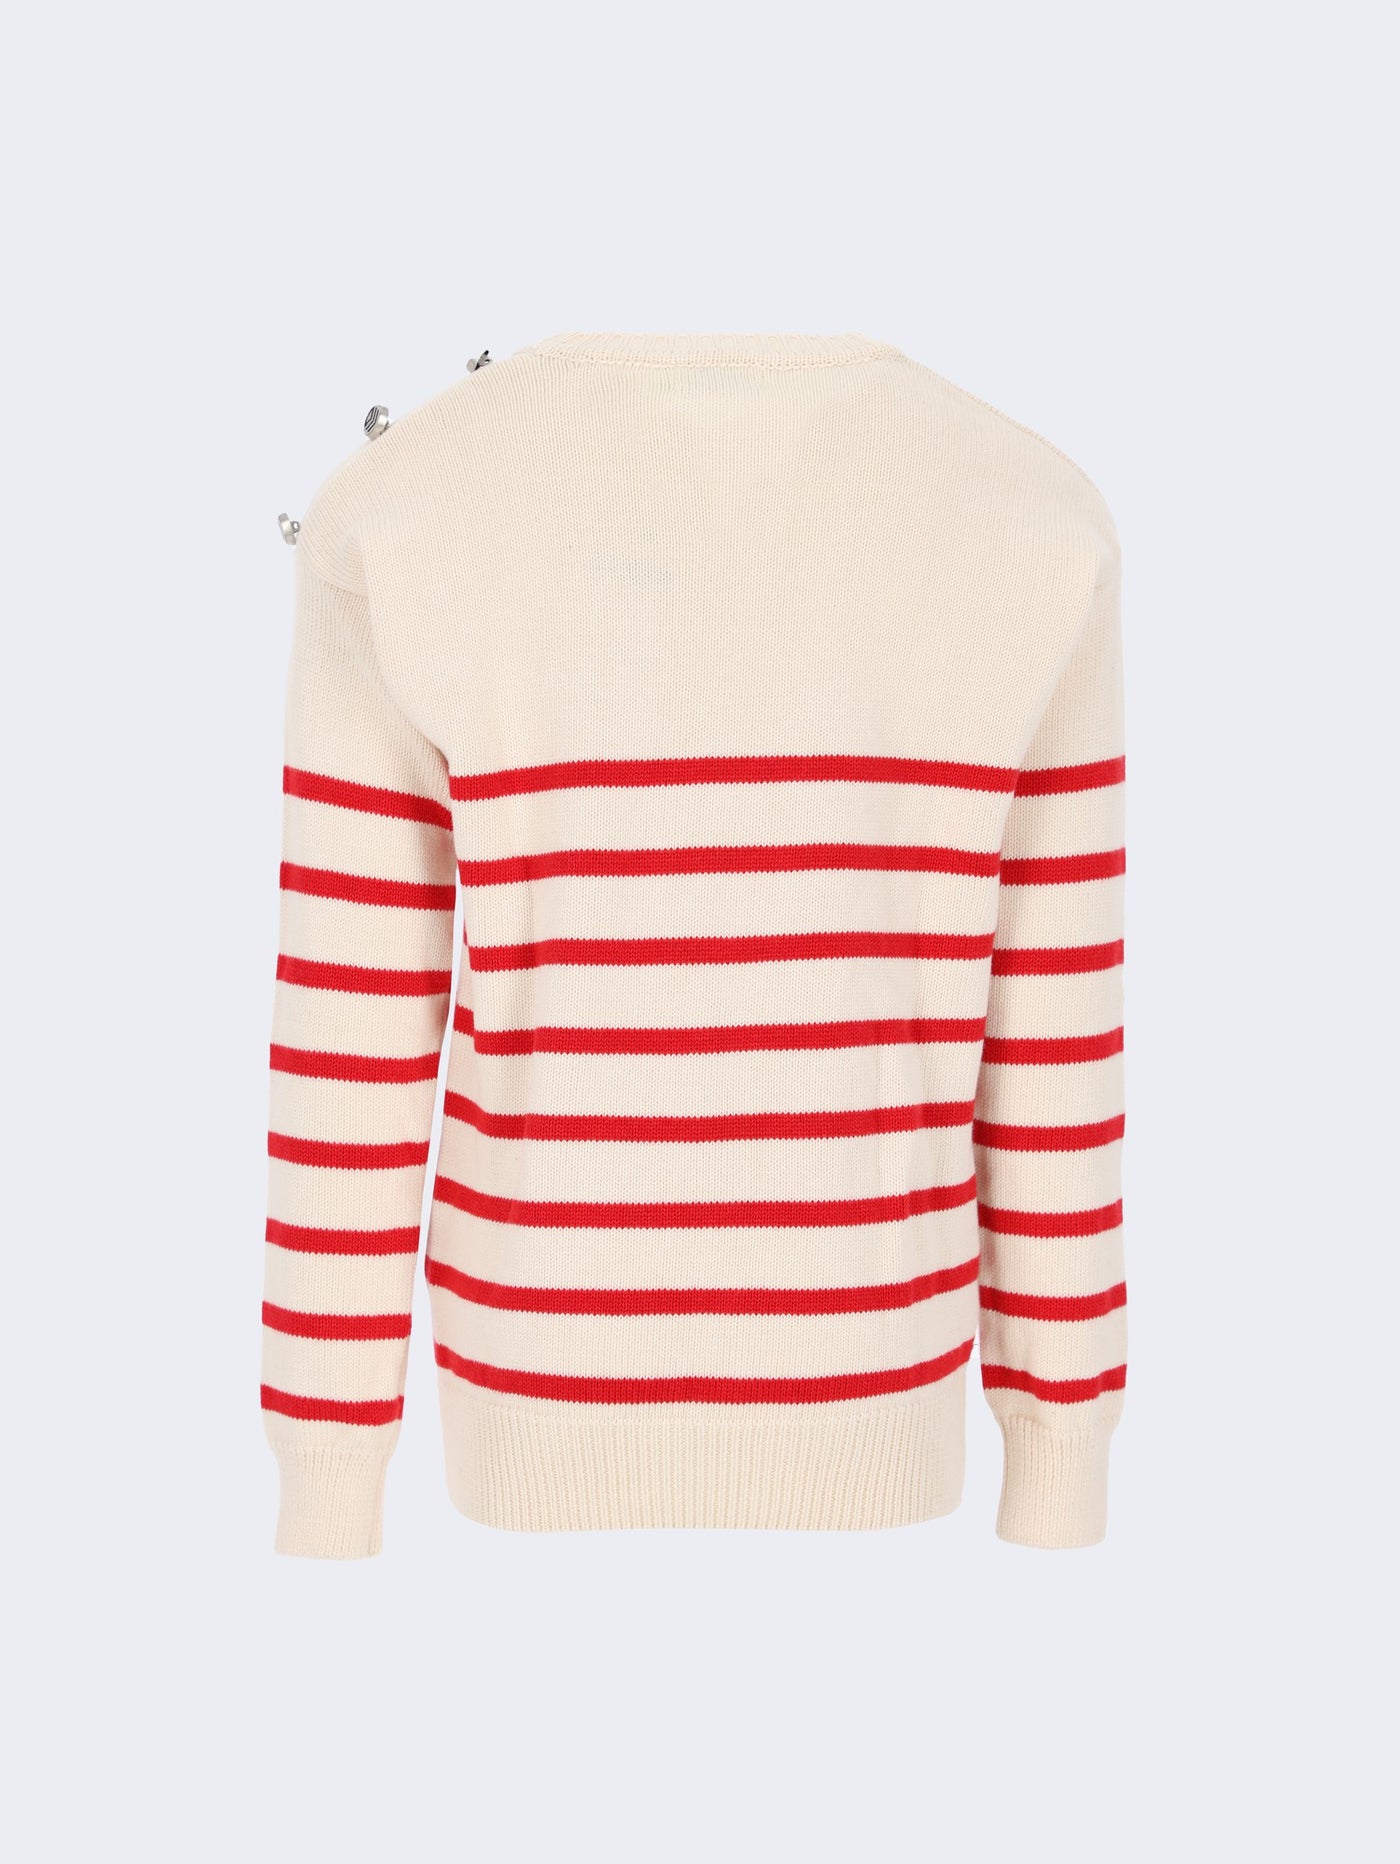 Kids Girls Horizontal Stripes Pullover with Buttons on Collar